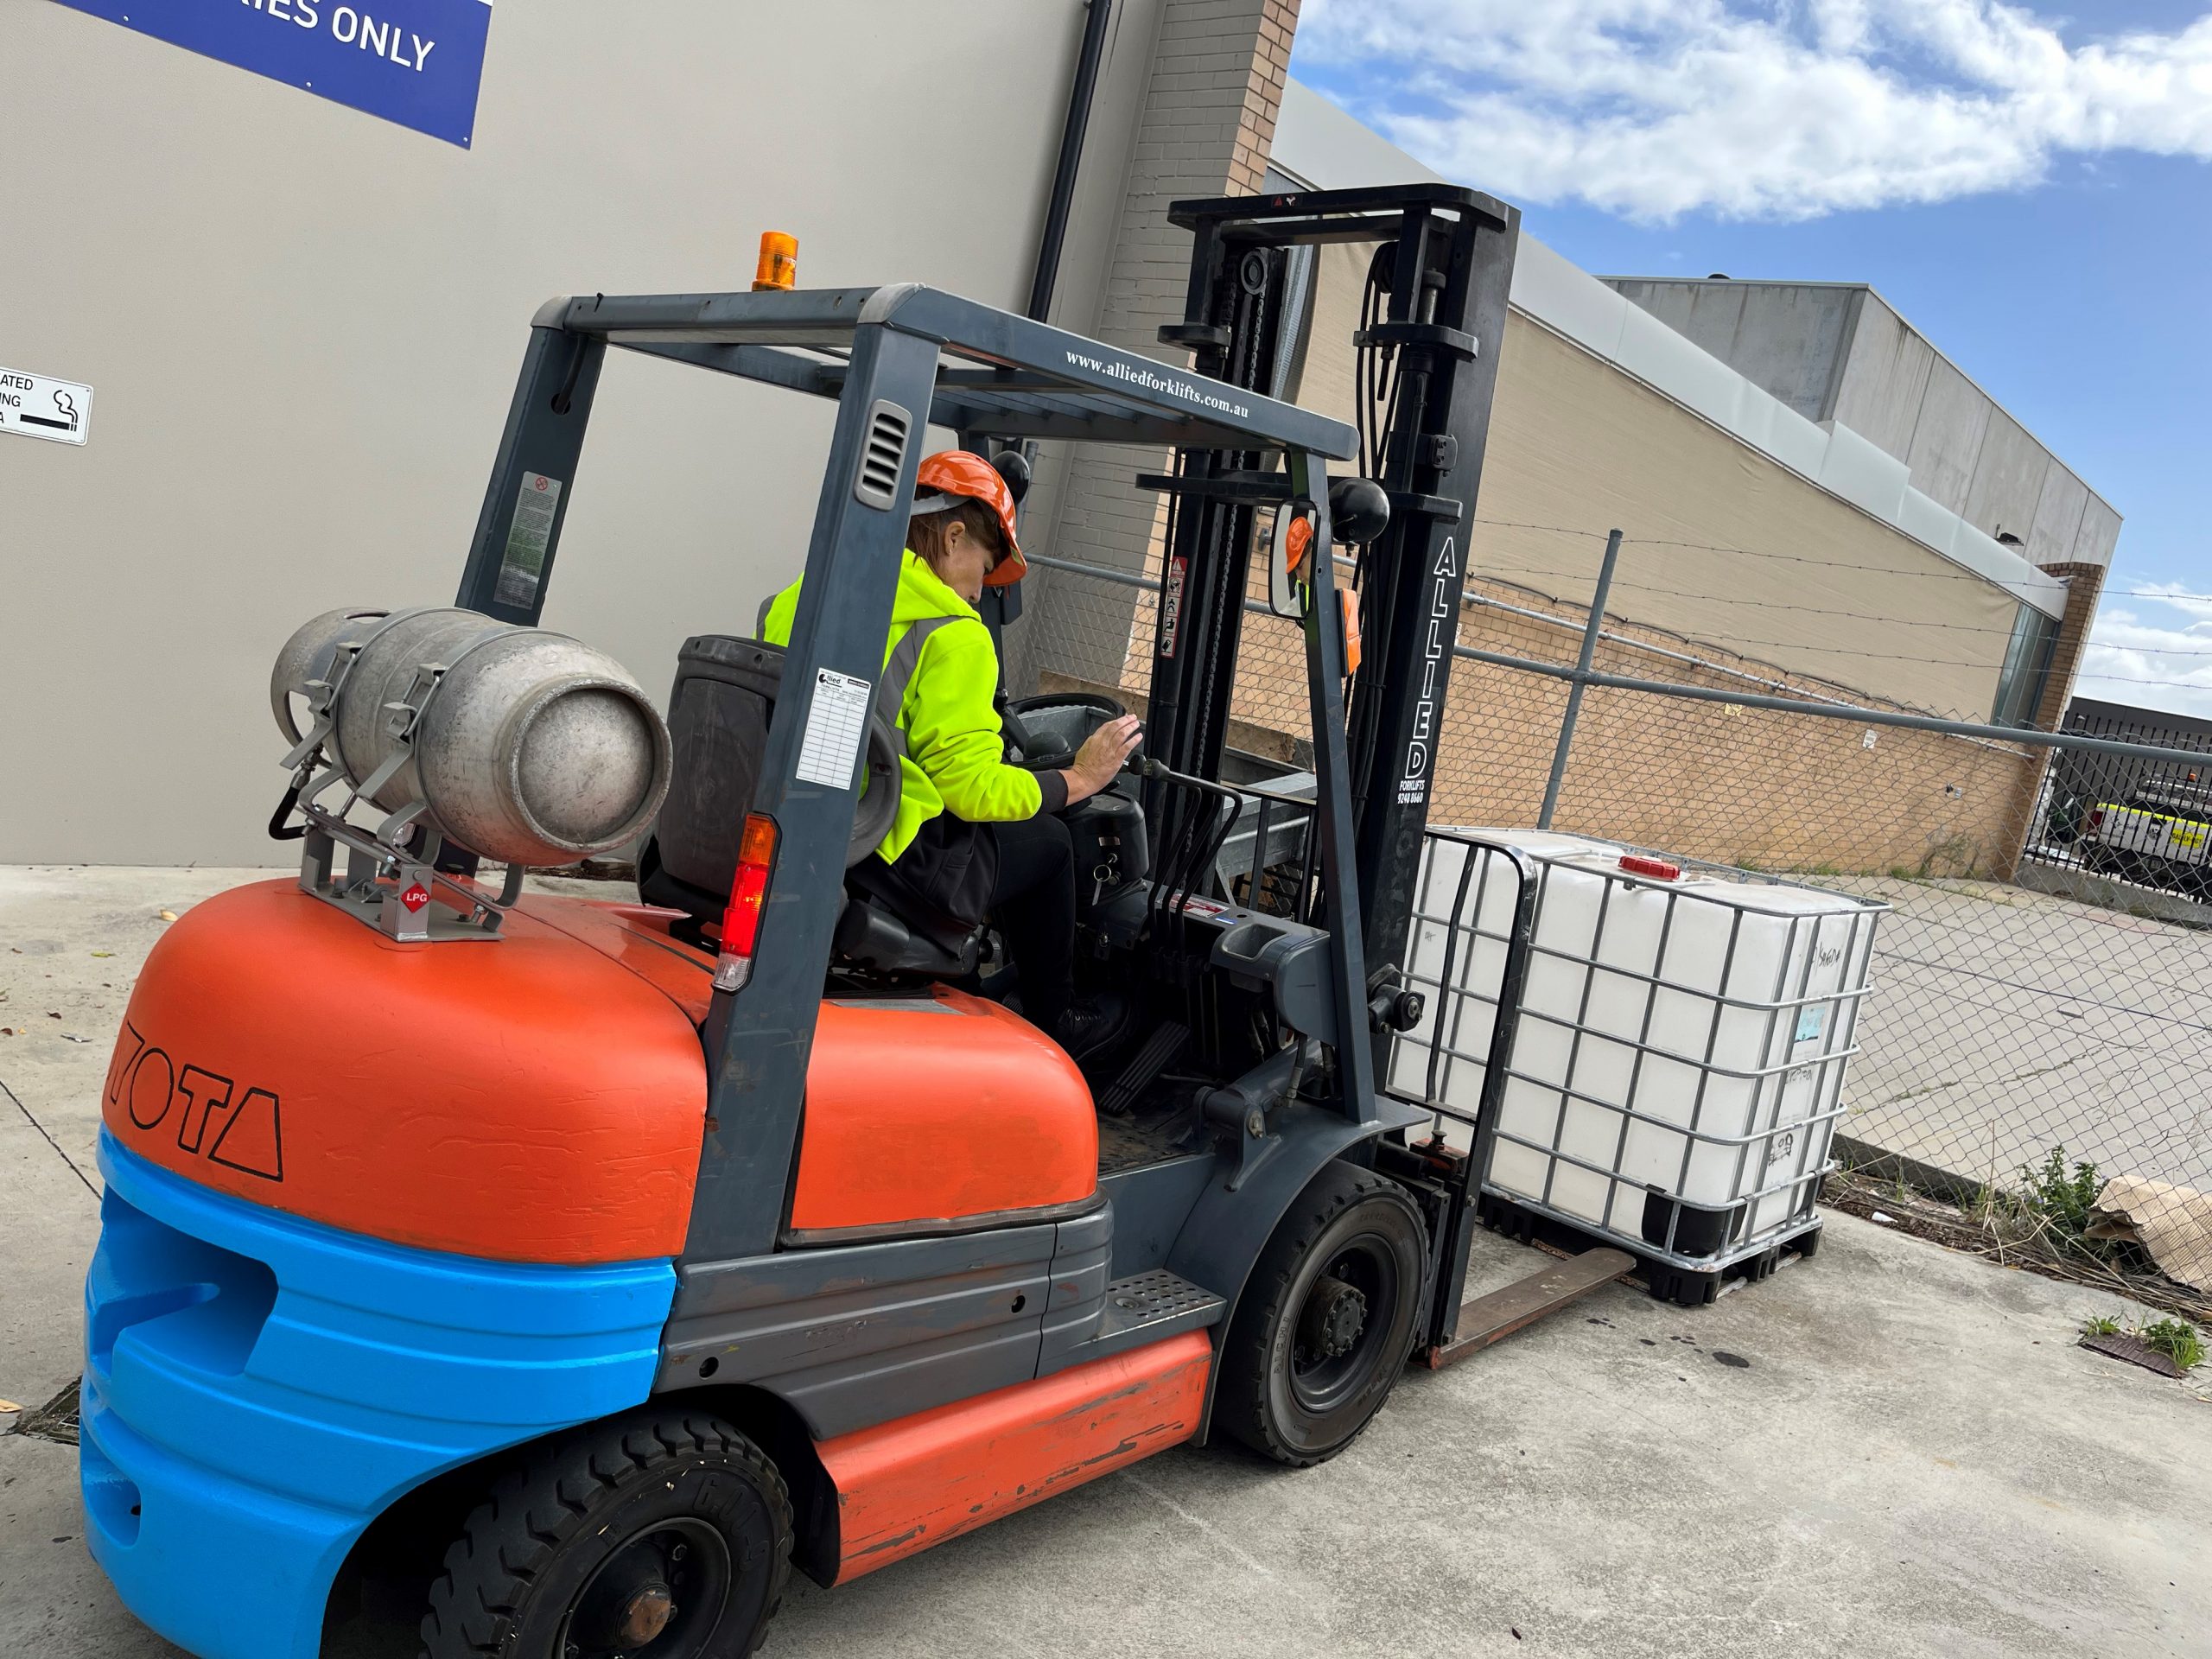 Licence to Operate a Forklift Truck - VOC course